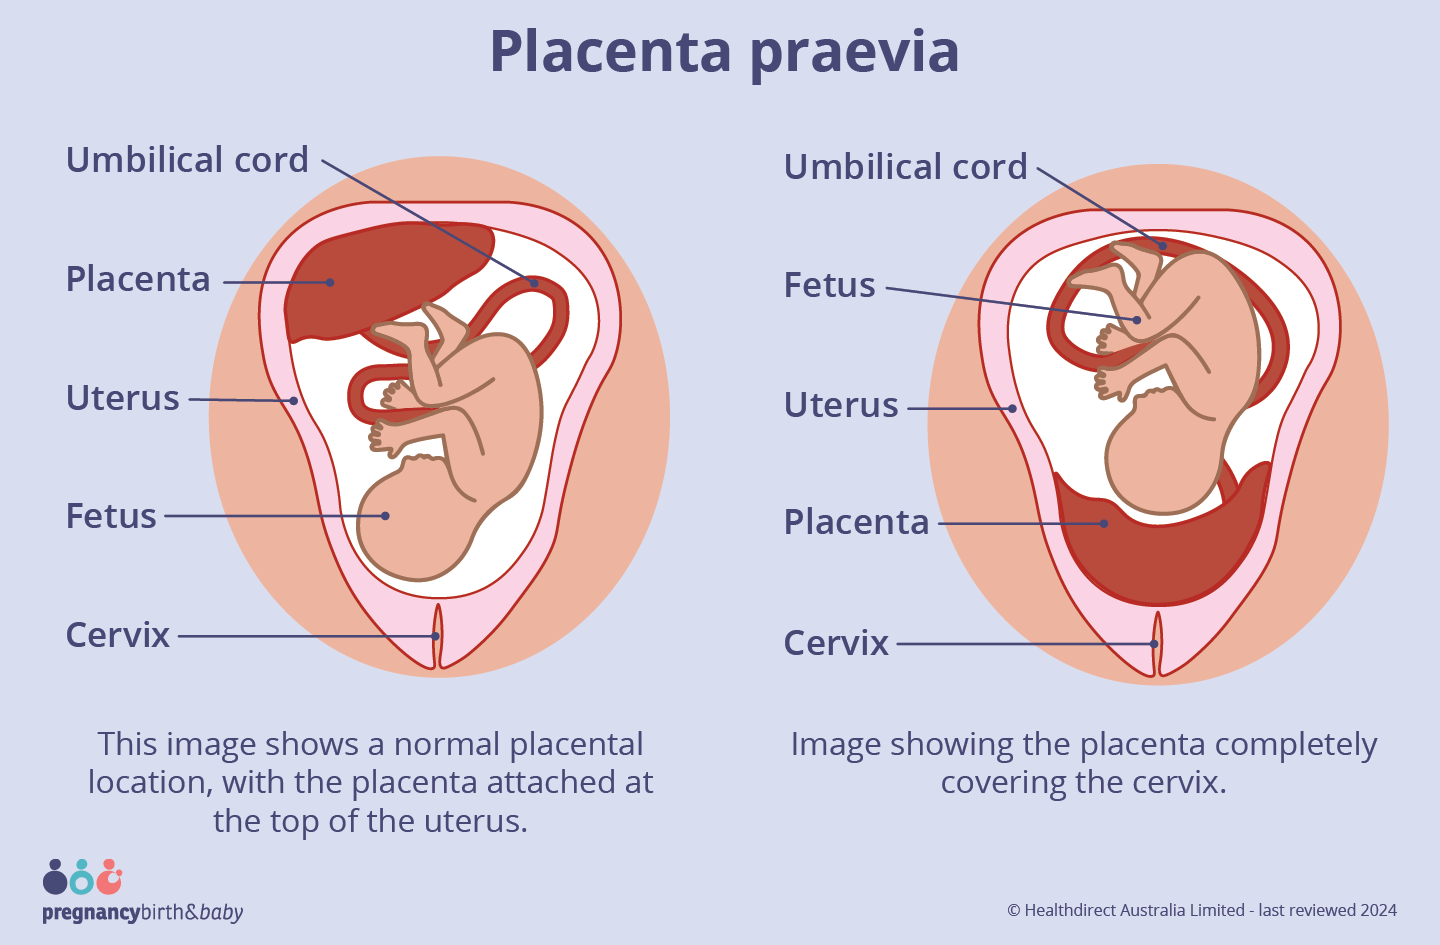 Image showing the placenta completely covering the cervix.